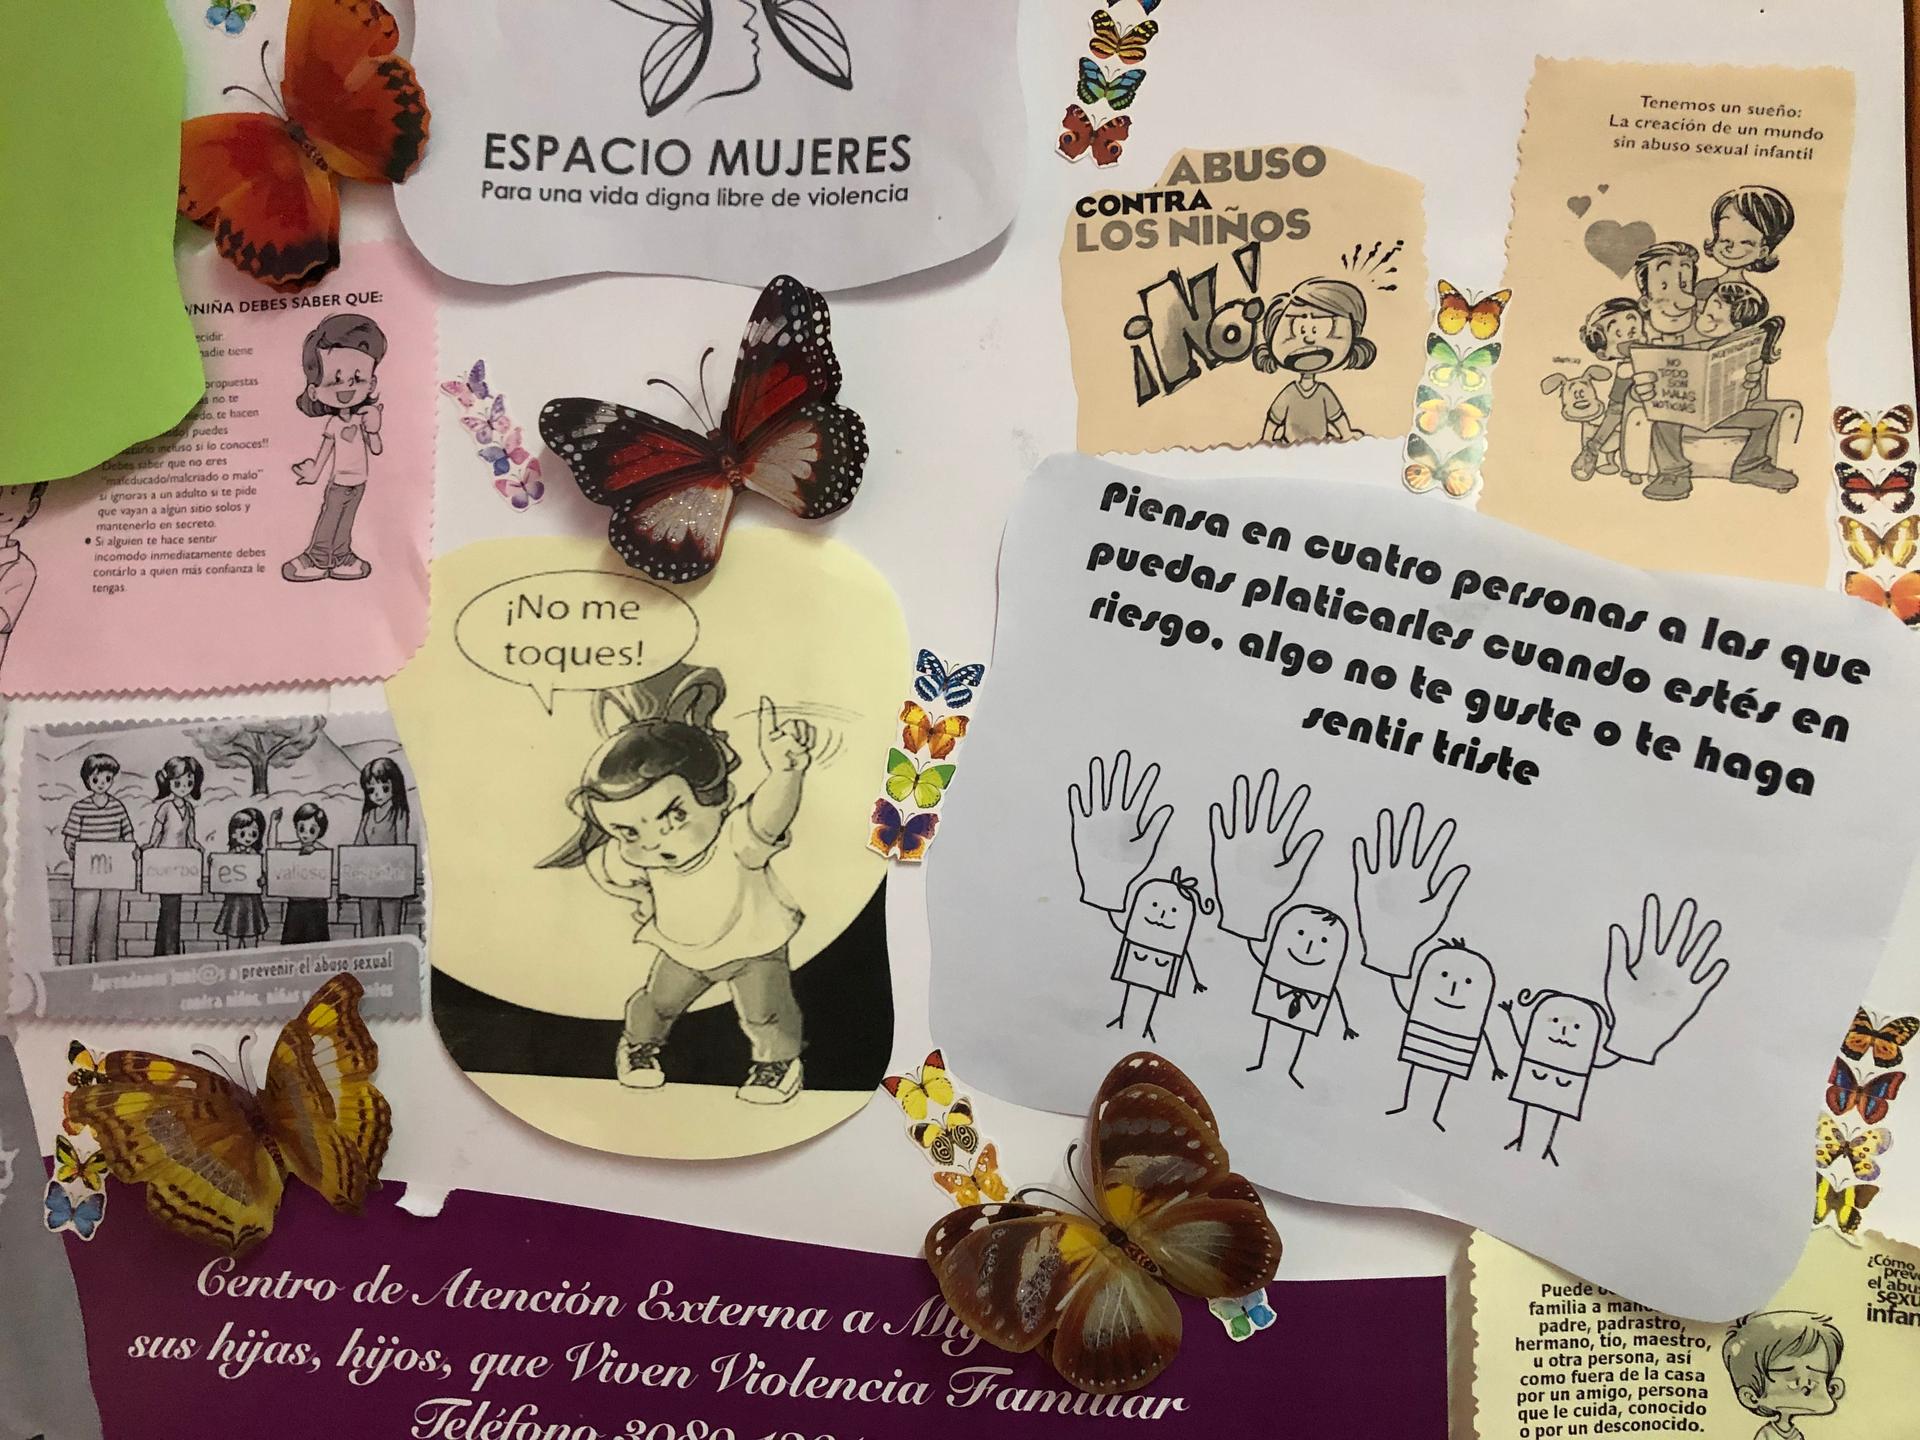 Signs at a women's shelter in Mexico City encourage female empowerment and tips for women facing violence.